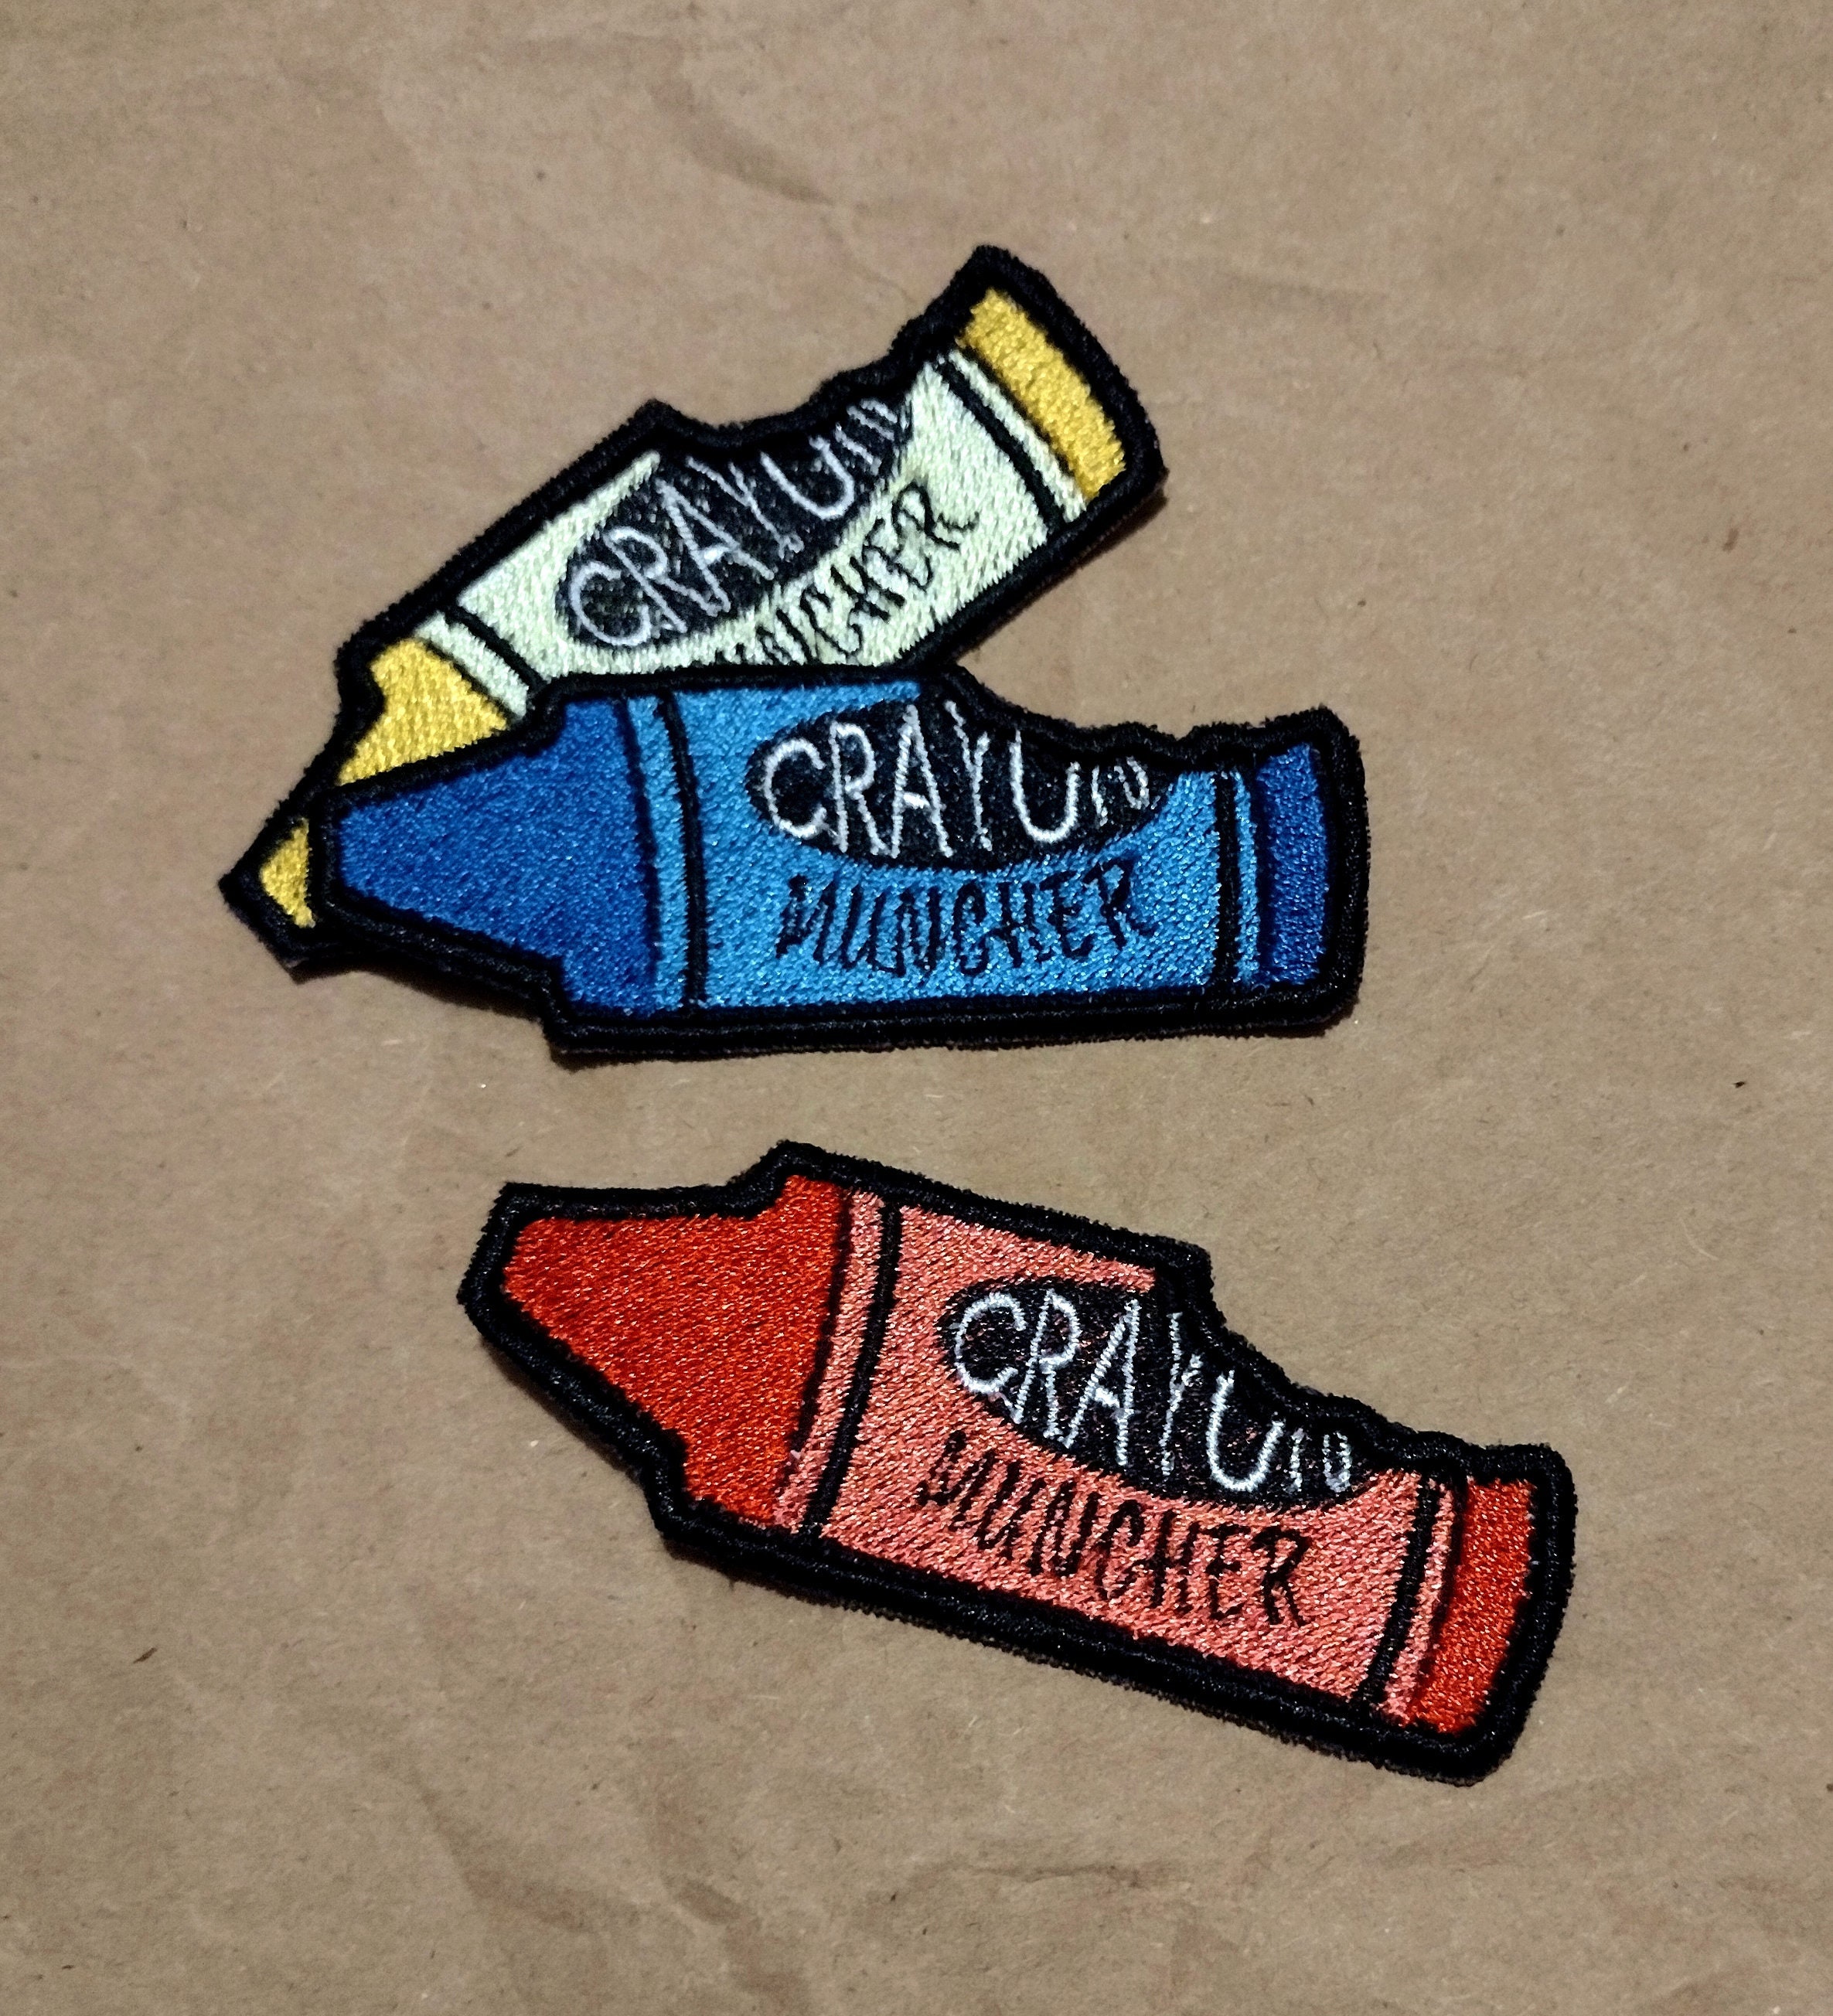 Marines and Crayons #EndlessJourney #military #usmc #marine #joke #cra, why do they call marines crayon eaters